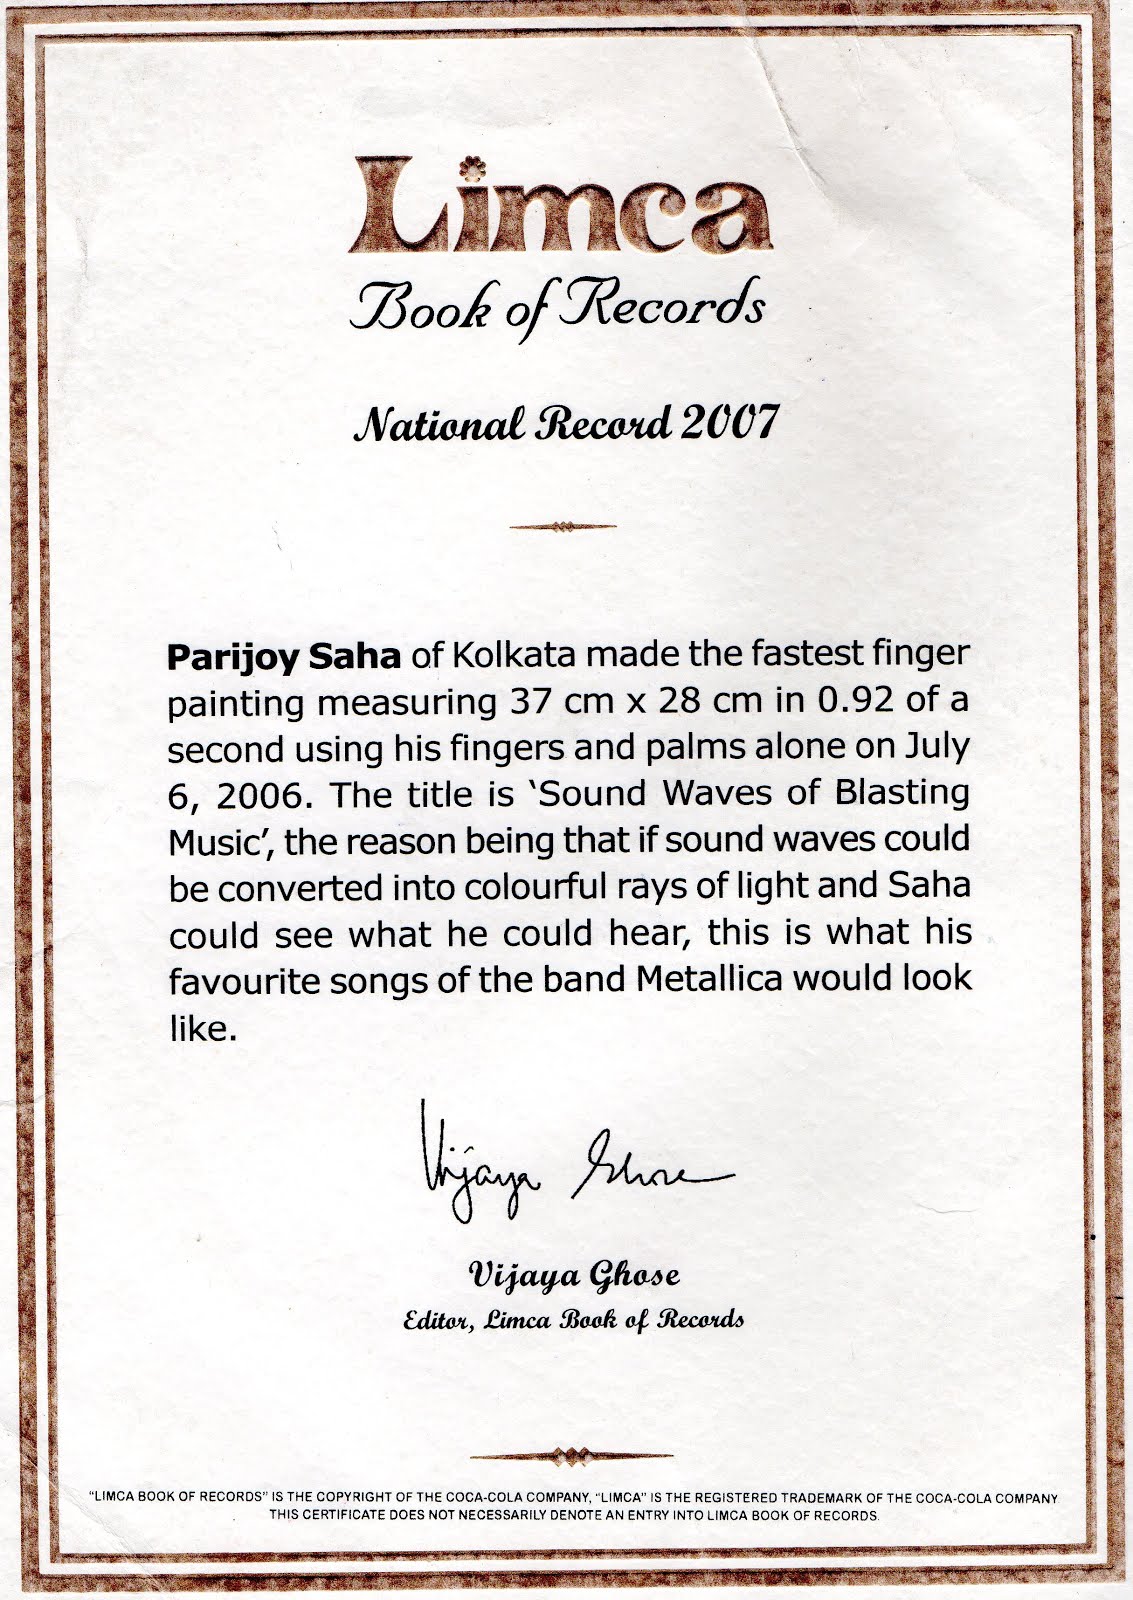 Limca book of records: fastest finger painting